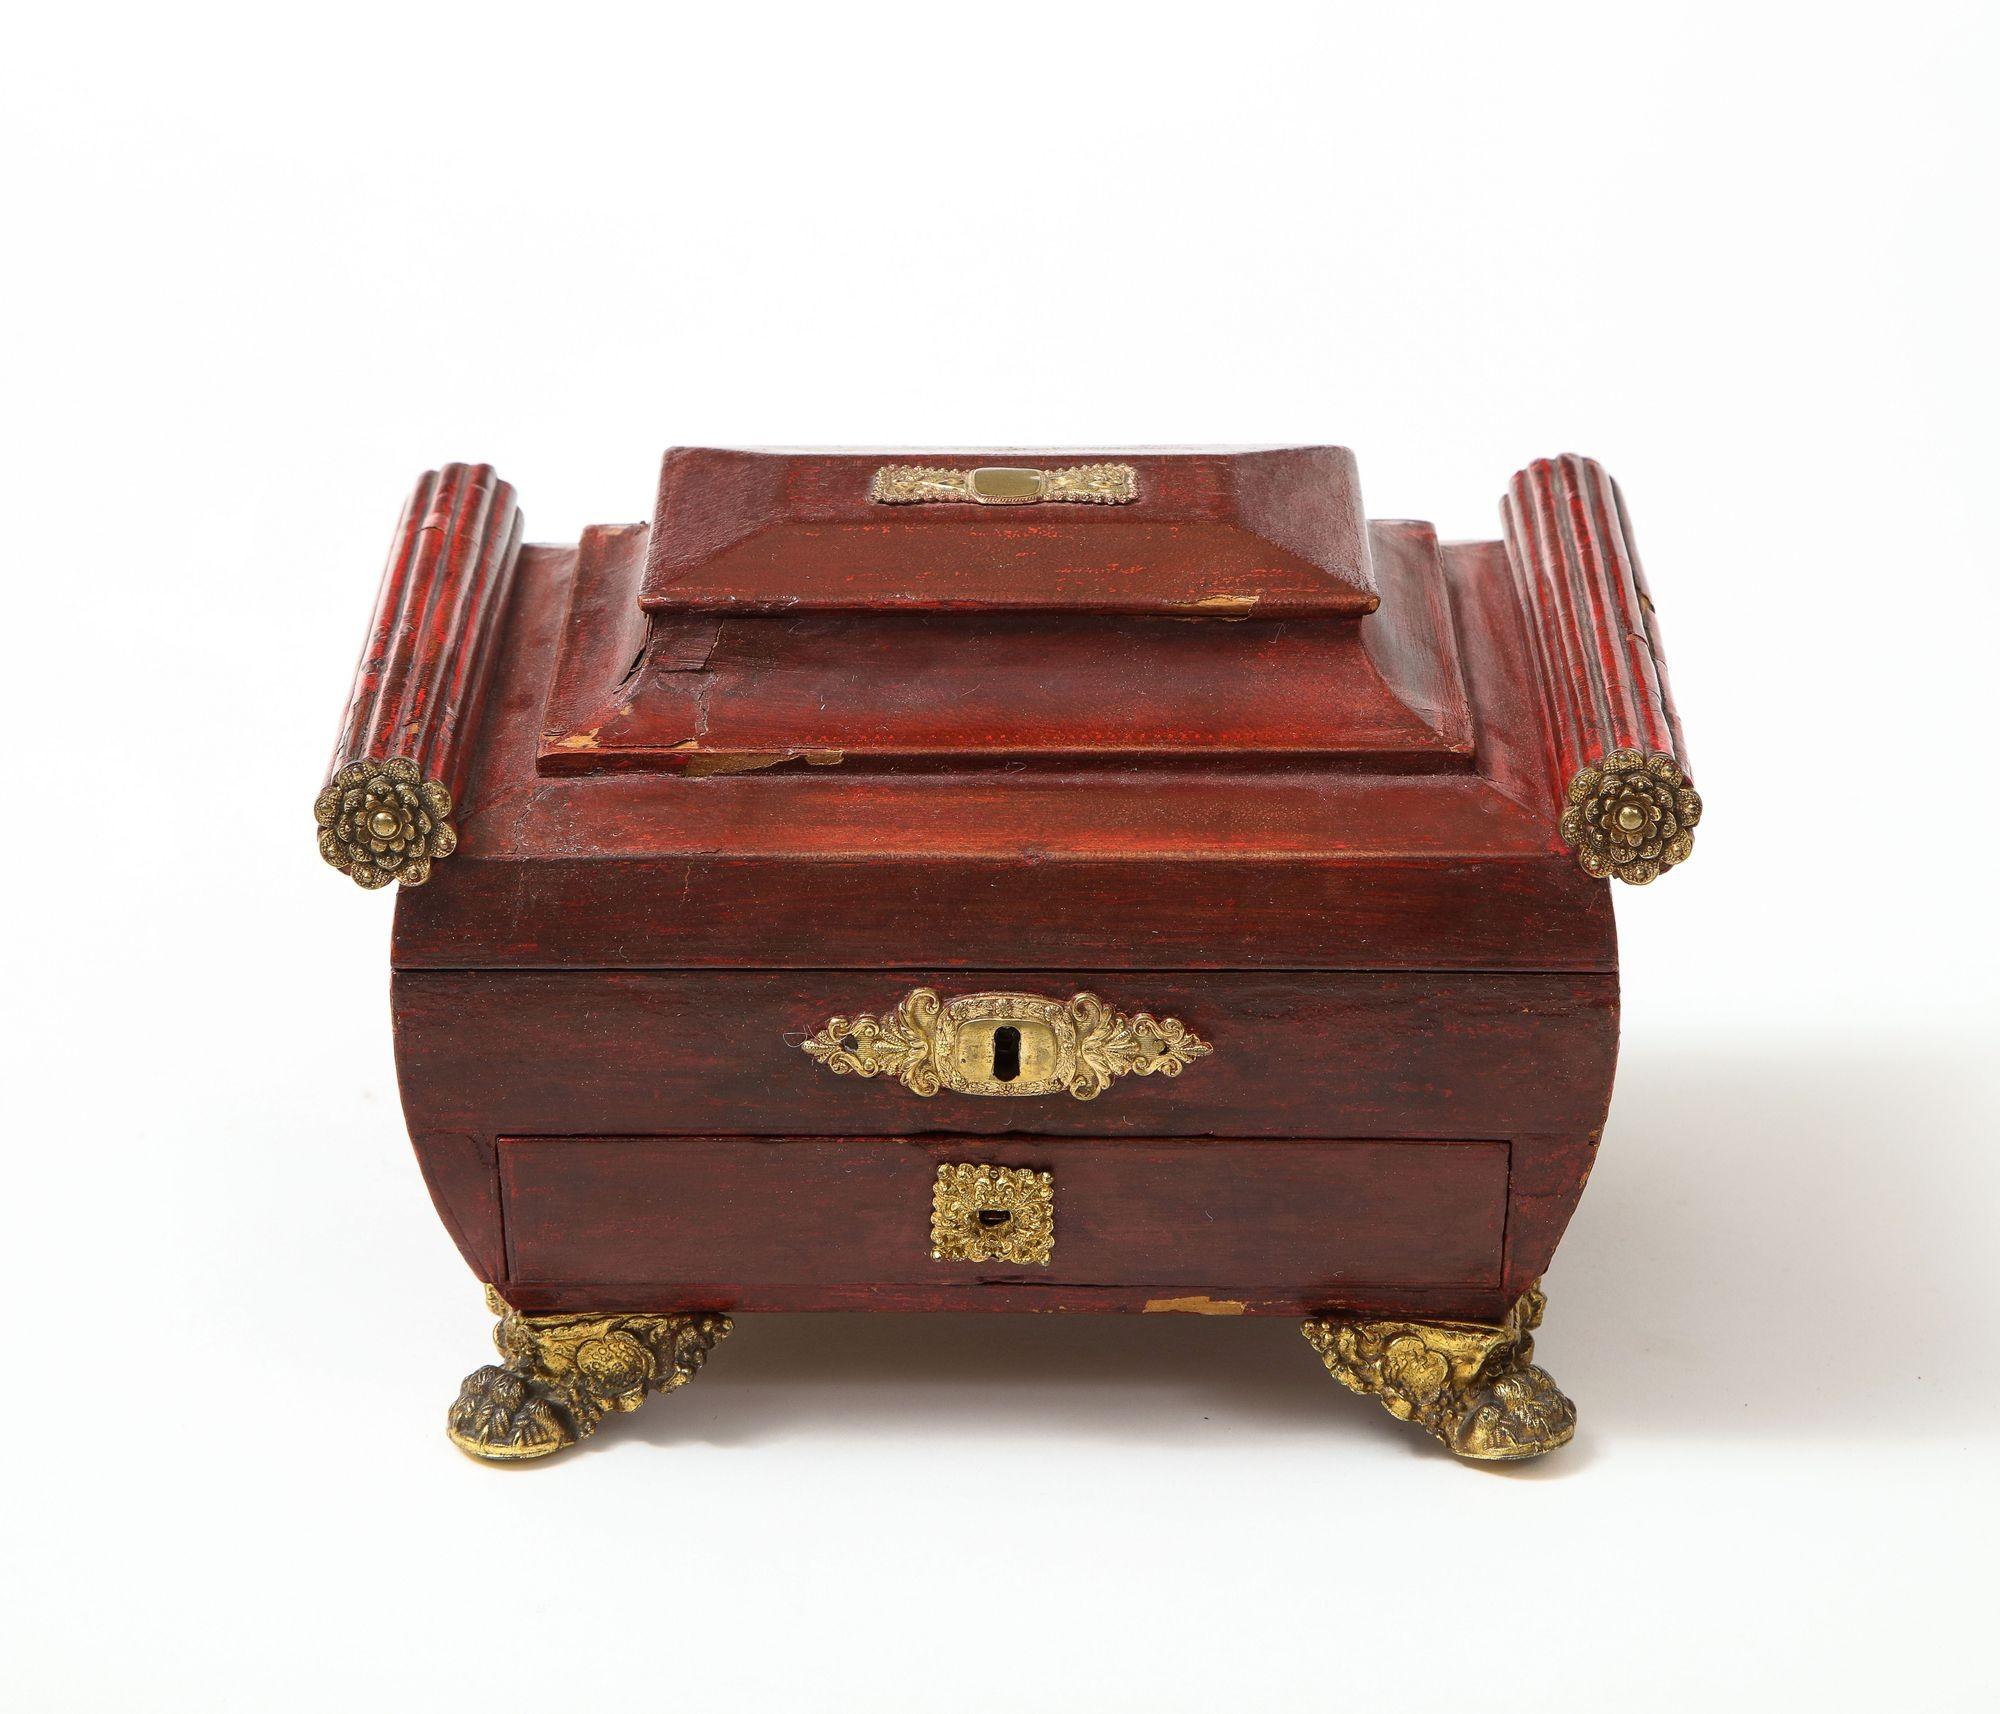 Regency leather covered sarcophagus shaped sewing box with gilt repoussé brass mounts and ribbed bolster ends over heavily molded top, the bombe body standing on flower adorned paw feet, the interior with fitted compartments and leather pouches, the